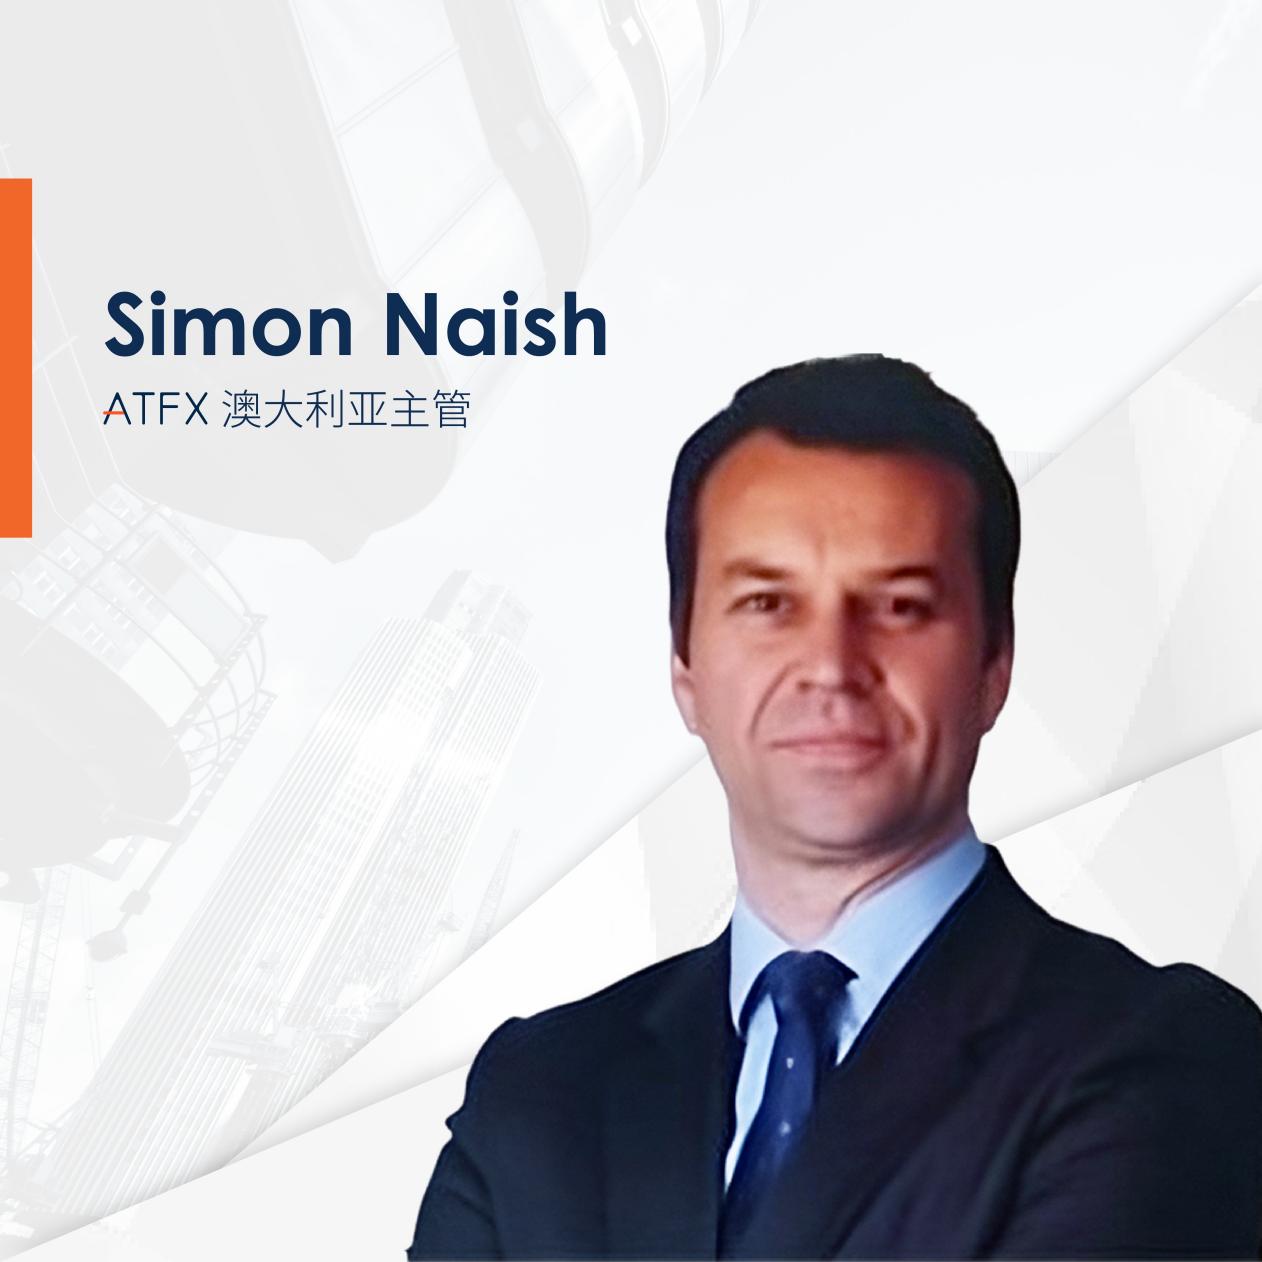 ATFXwelcomeSimon NaishJoining and leading a new chapter of business in the Australian market168 / author:atfx2019 / PostsID:1726857